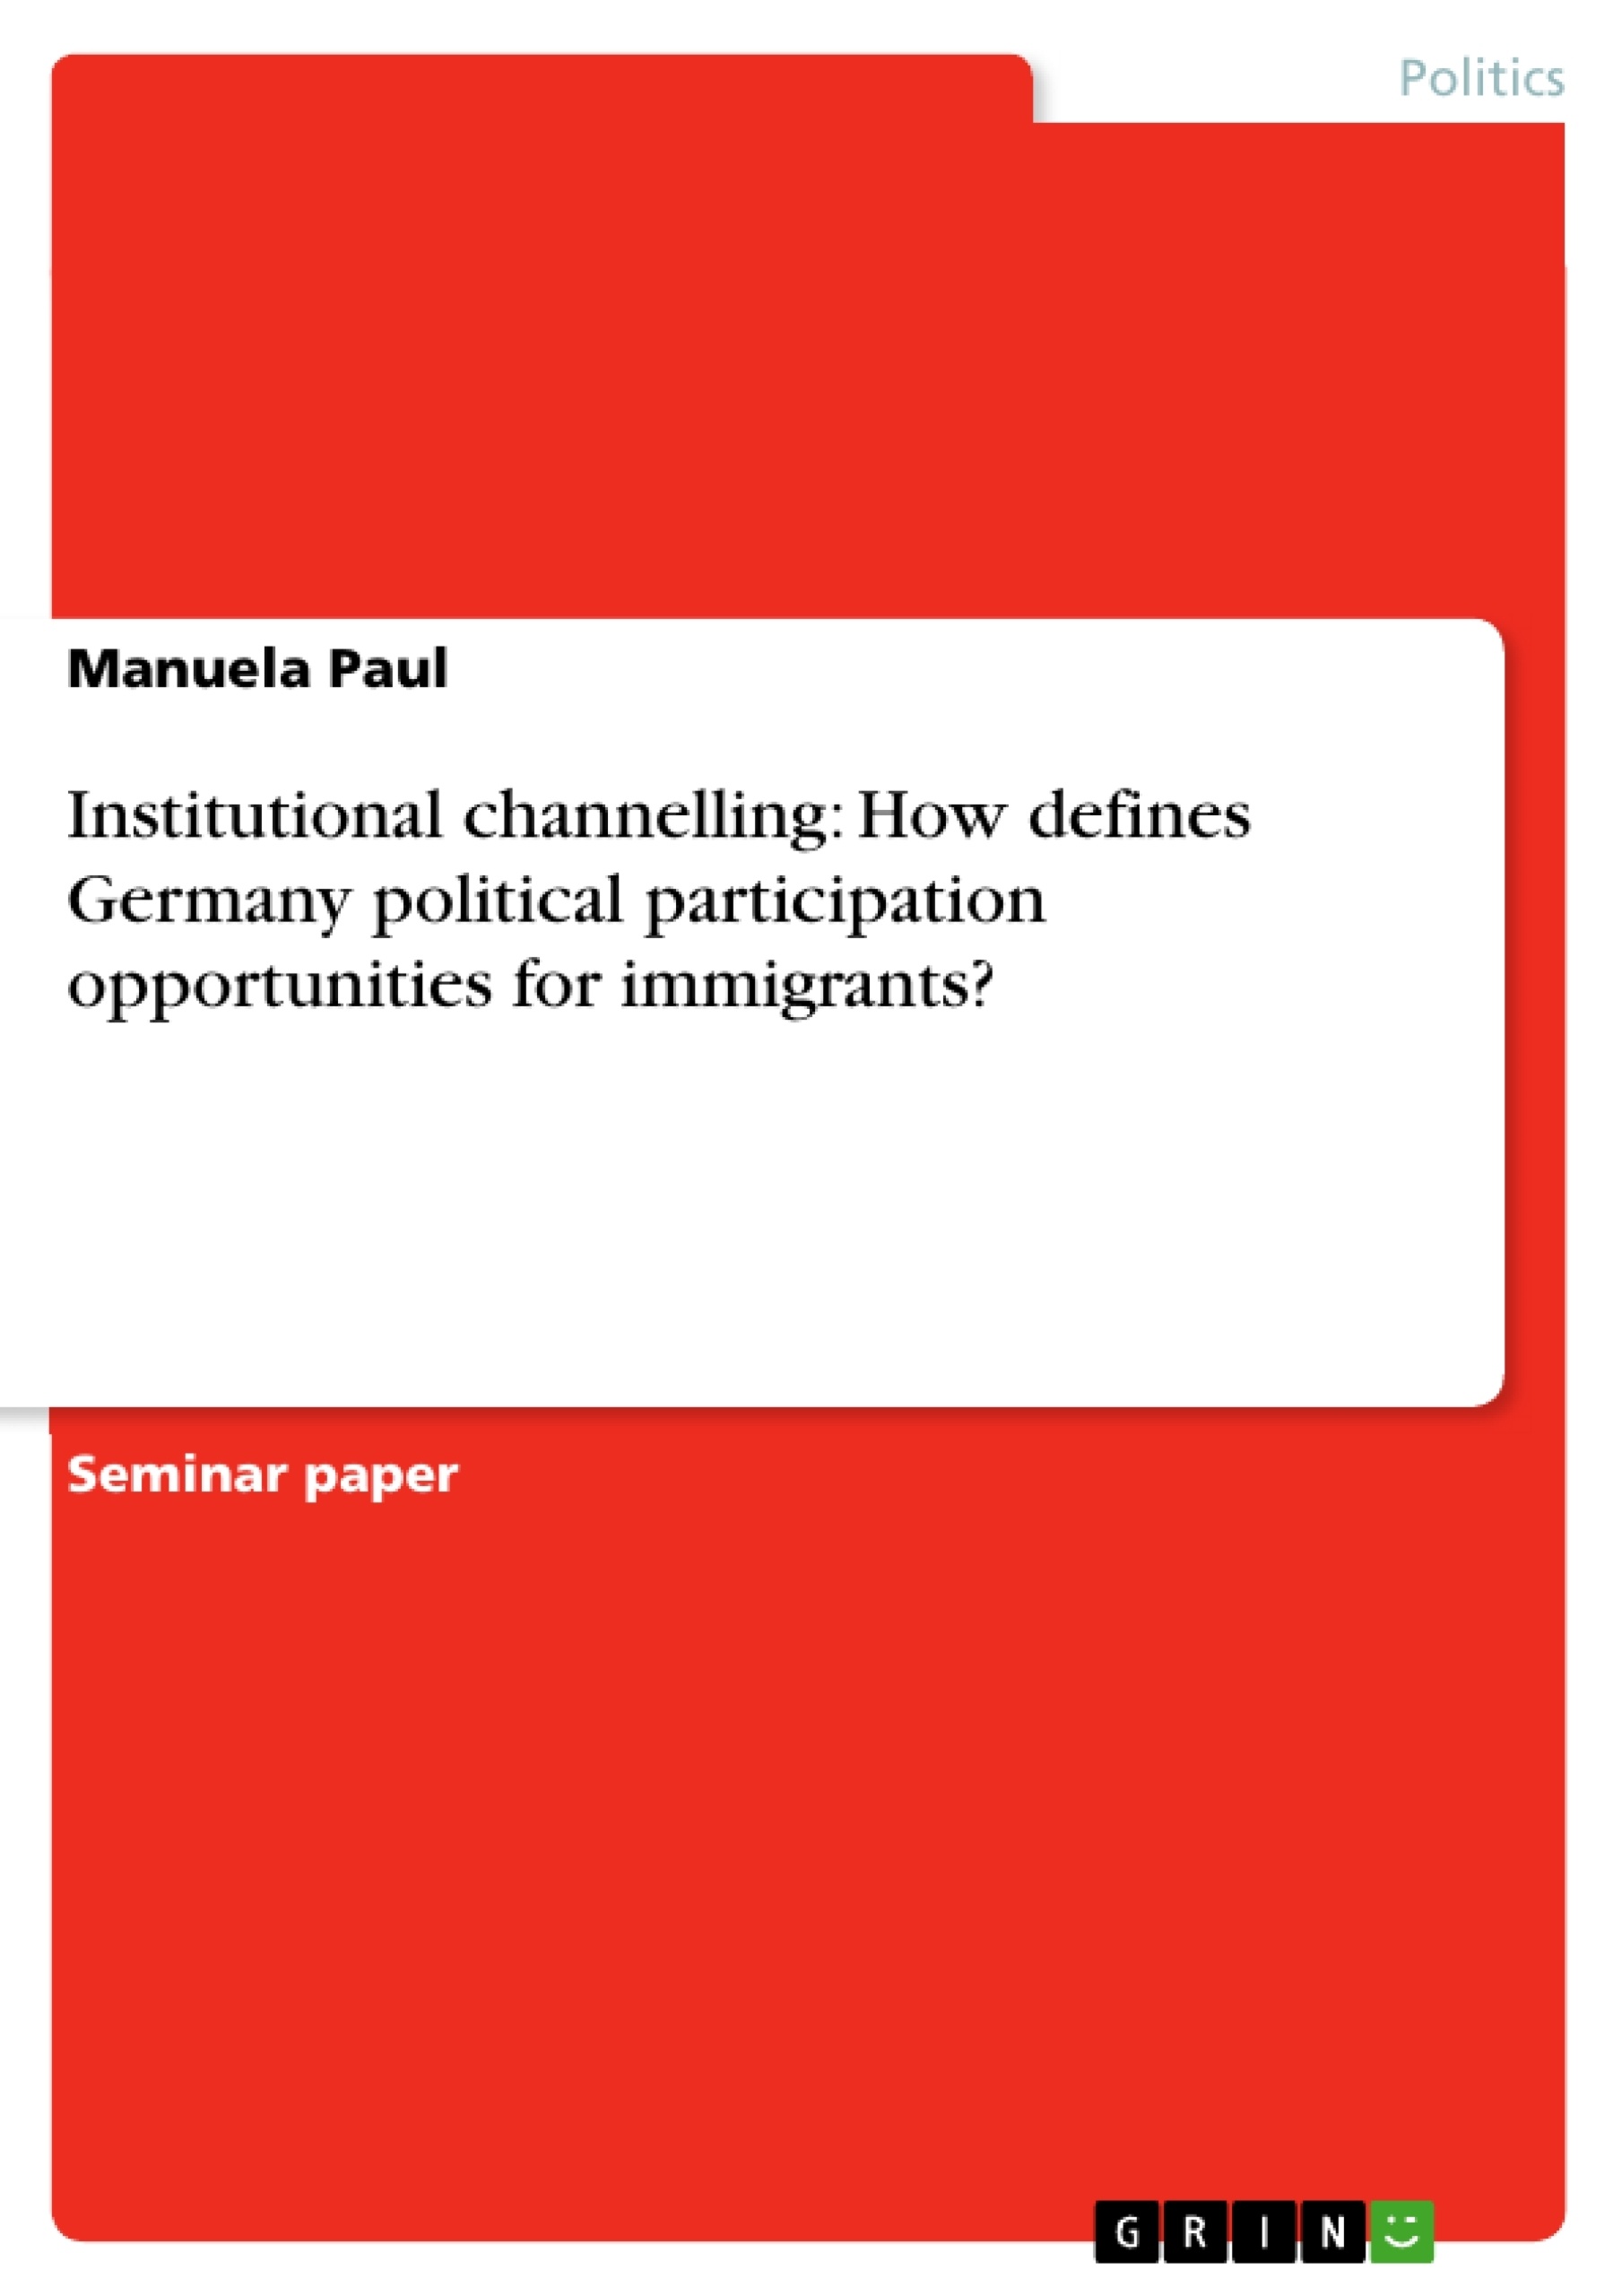 Title: Institutional channelling: How defines Germany political participation opportunities for immigrants?